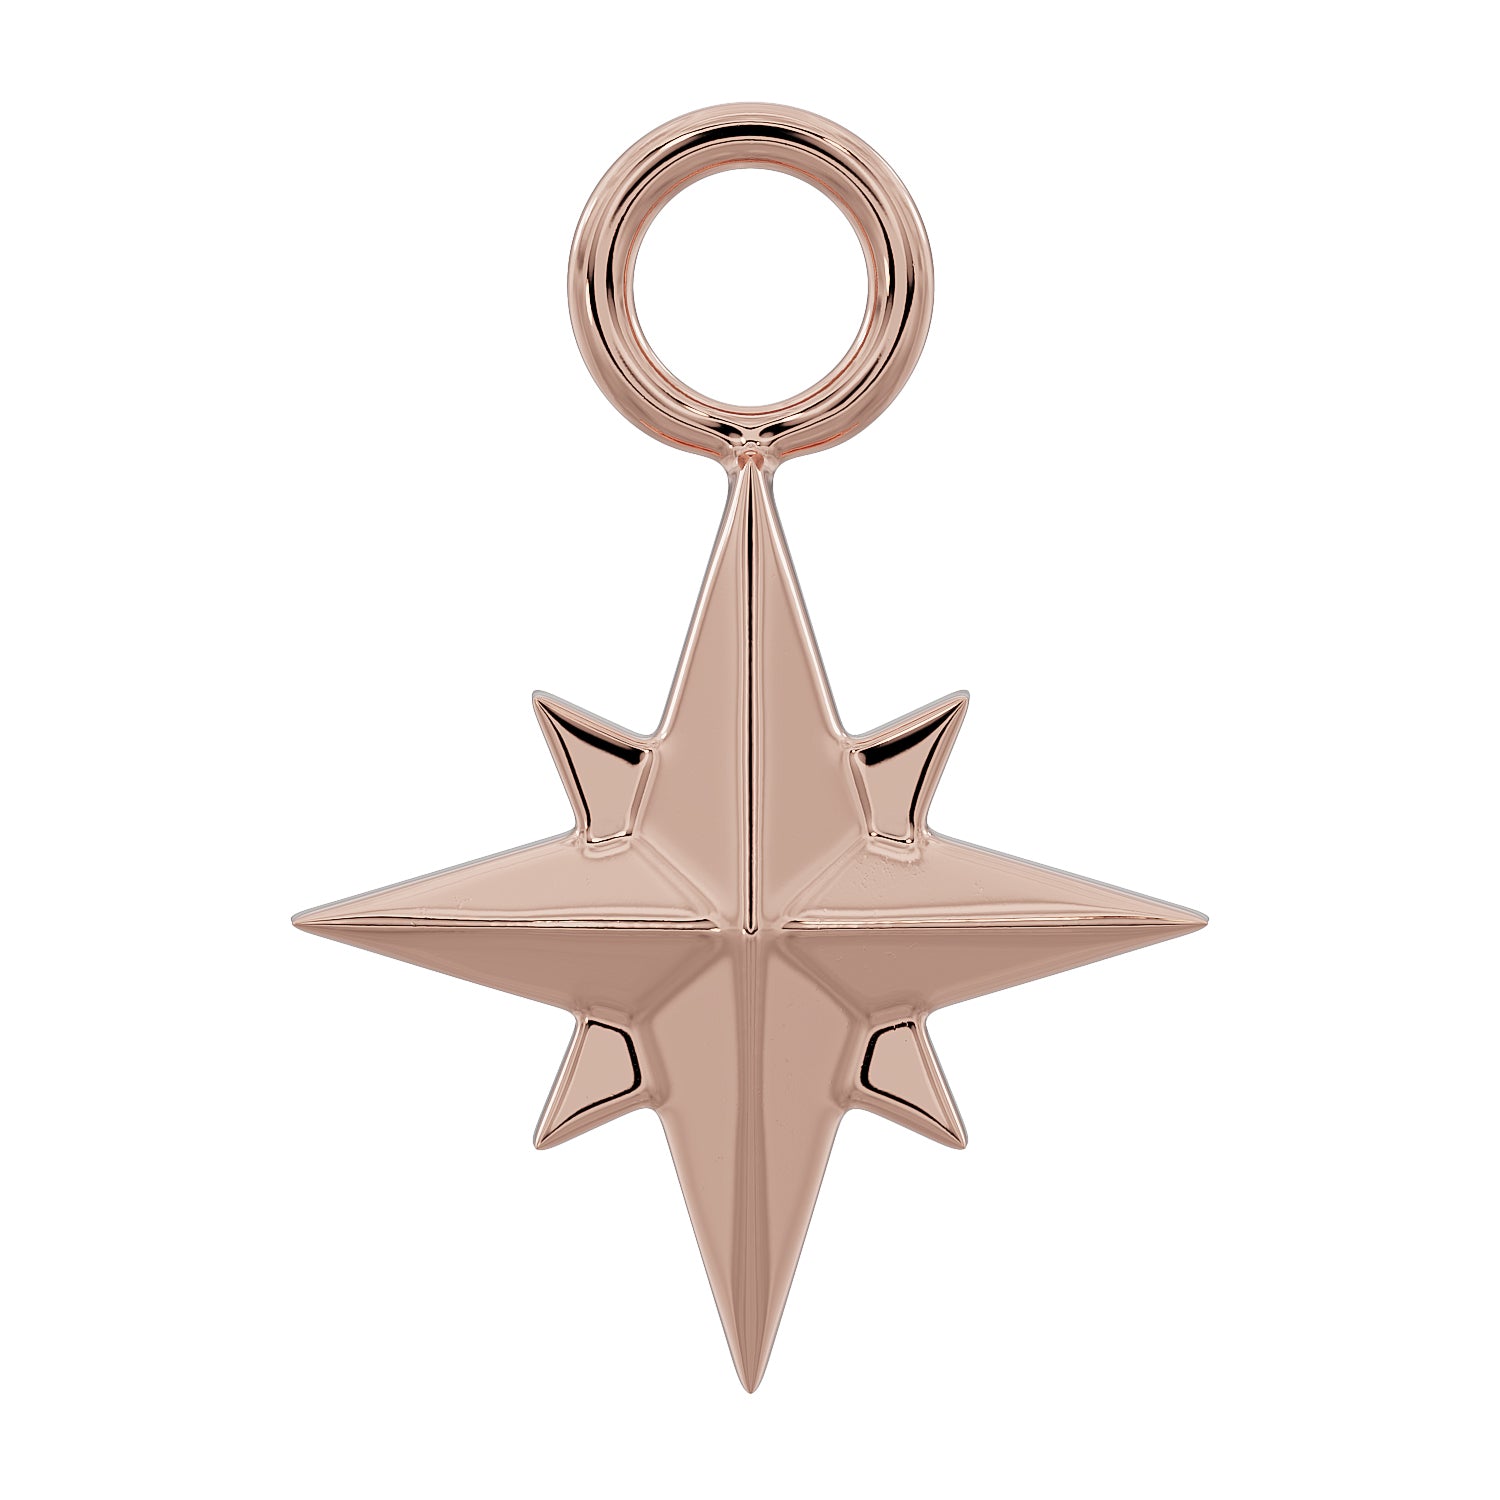 North Star Charm Accessory for Piercing Jewelry-14K Rose Gold